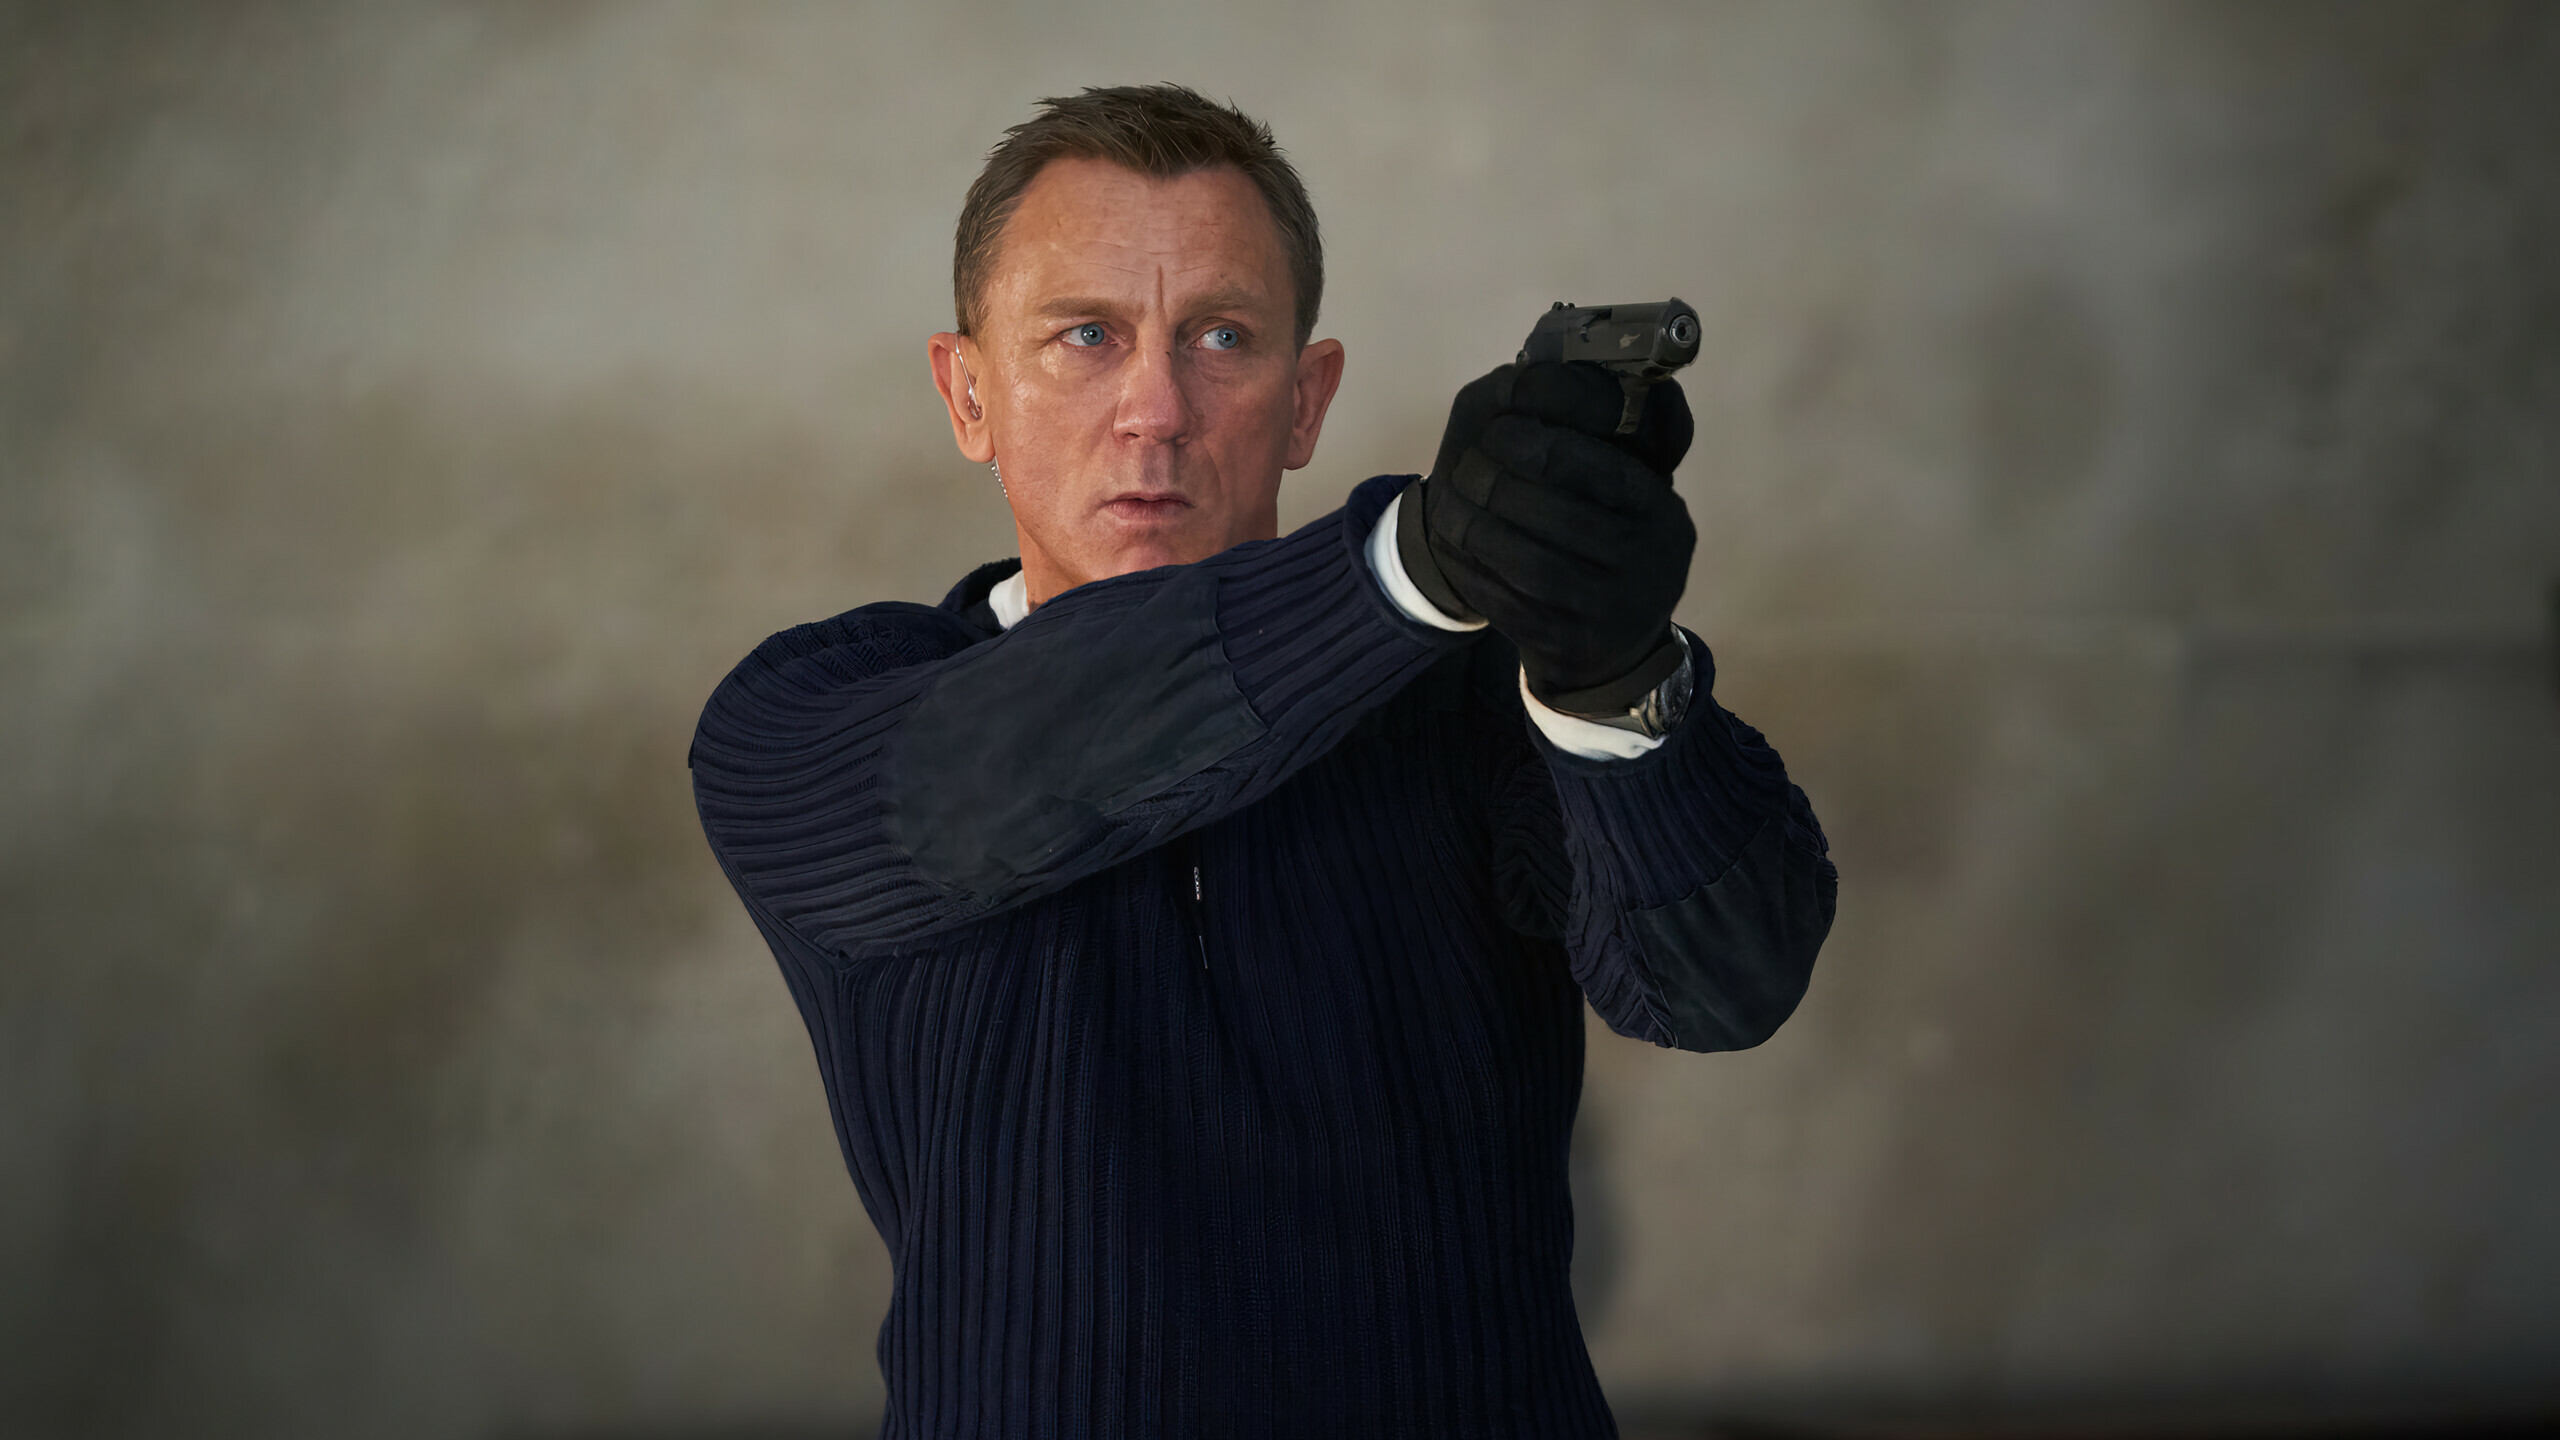 No Time to Die: The 25th James Bond movie and the fifth with Daniel Craig in the lead role. 2560x1440 HD Wallpaper.